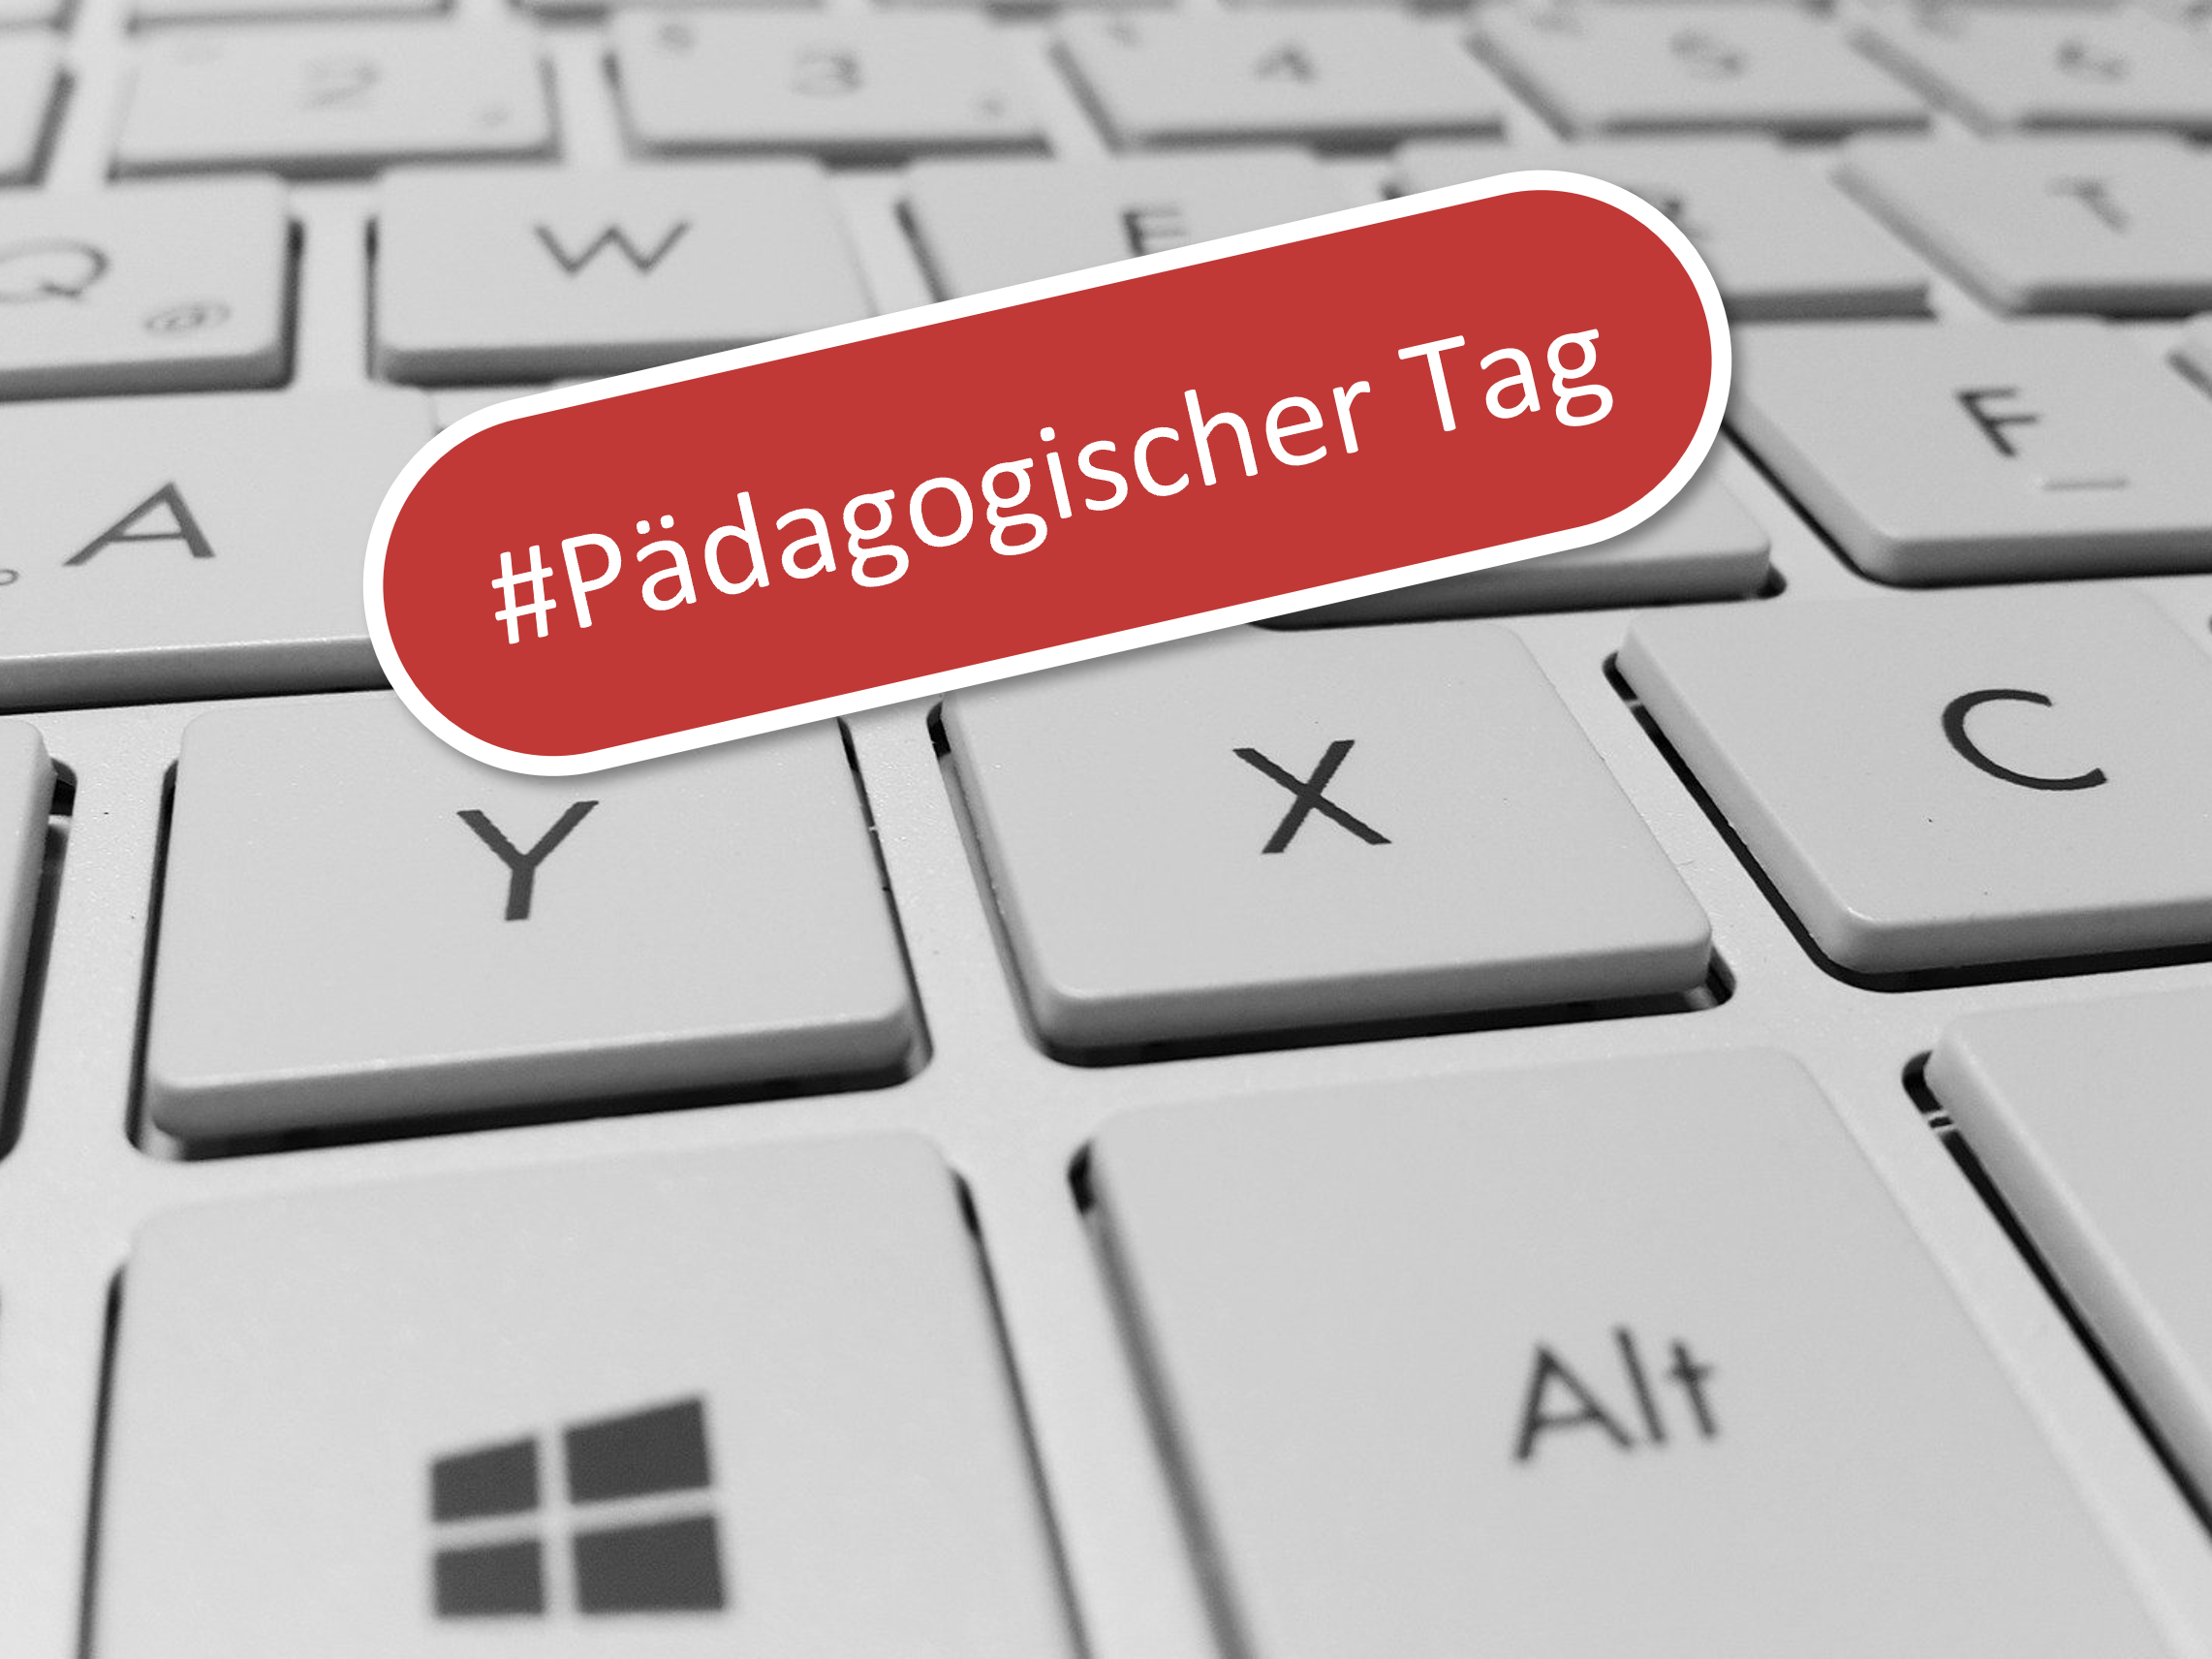 You are currently viewing Pädagogischer Tag am 15.06.2022